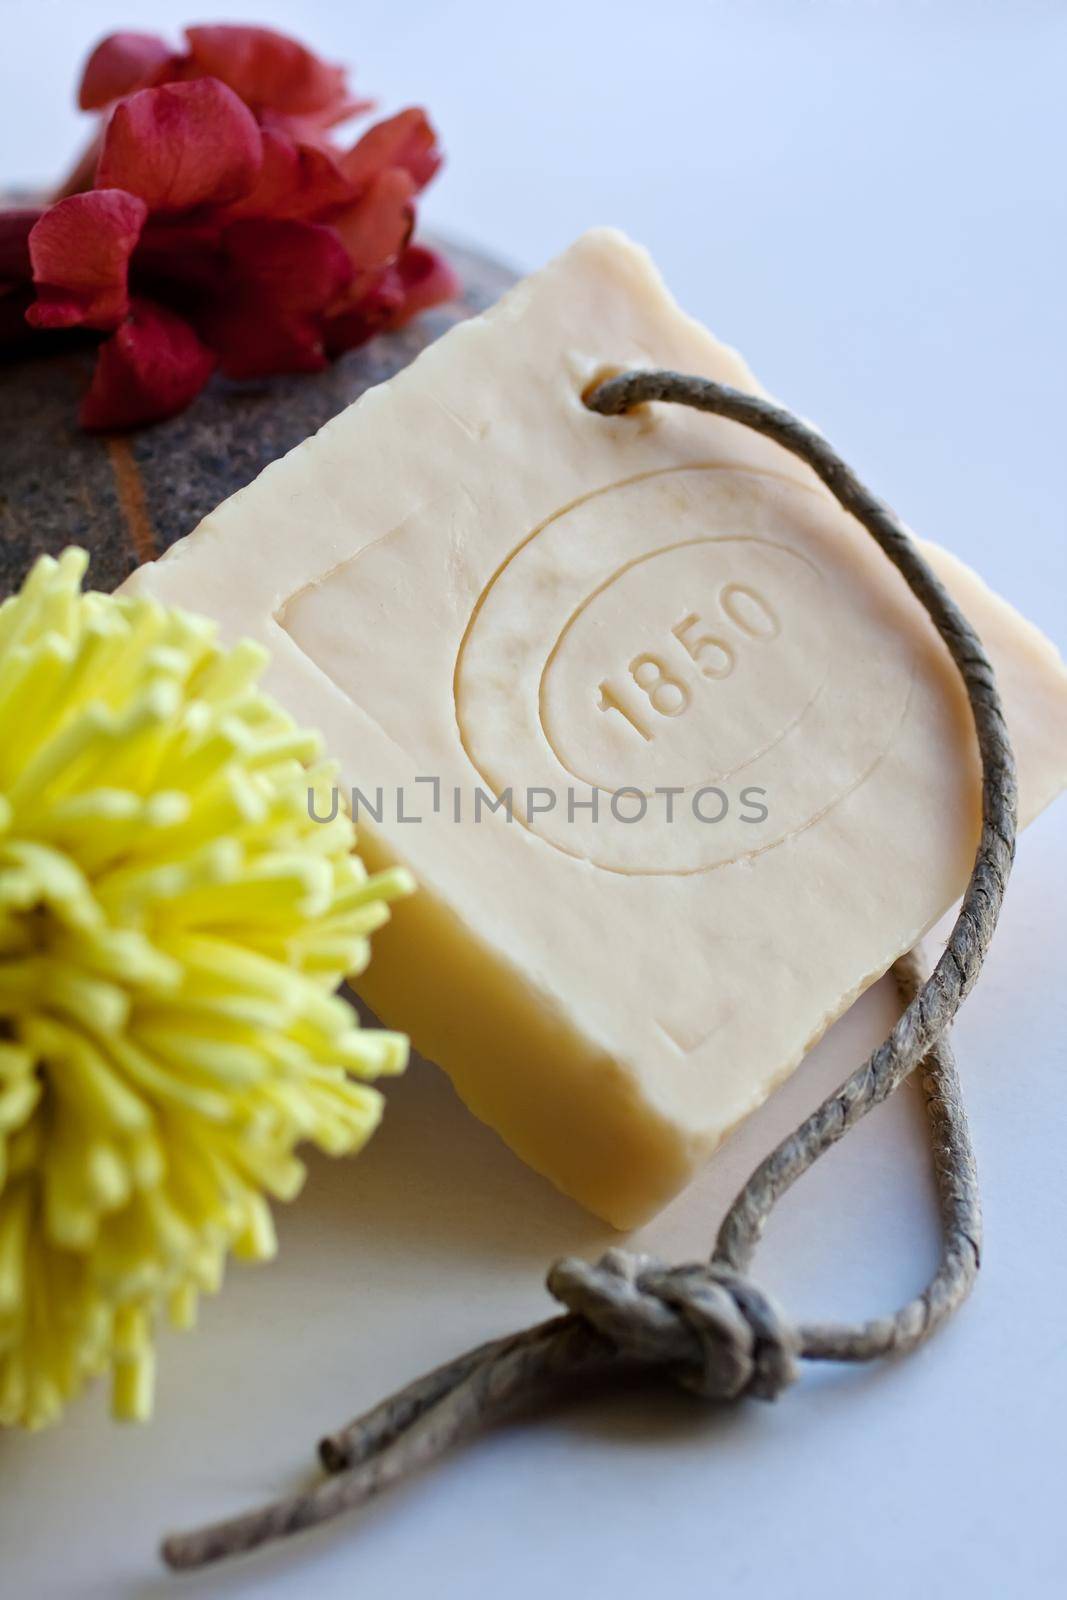 View of Natural soap, sponge and red flower